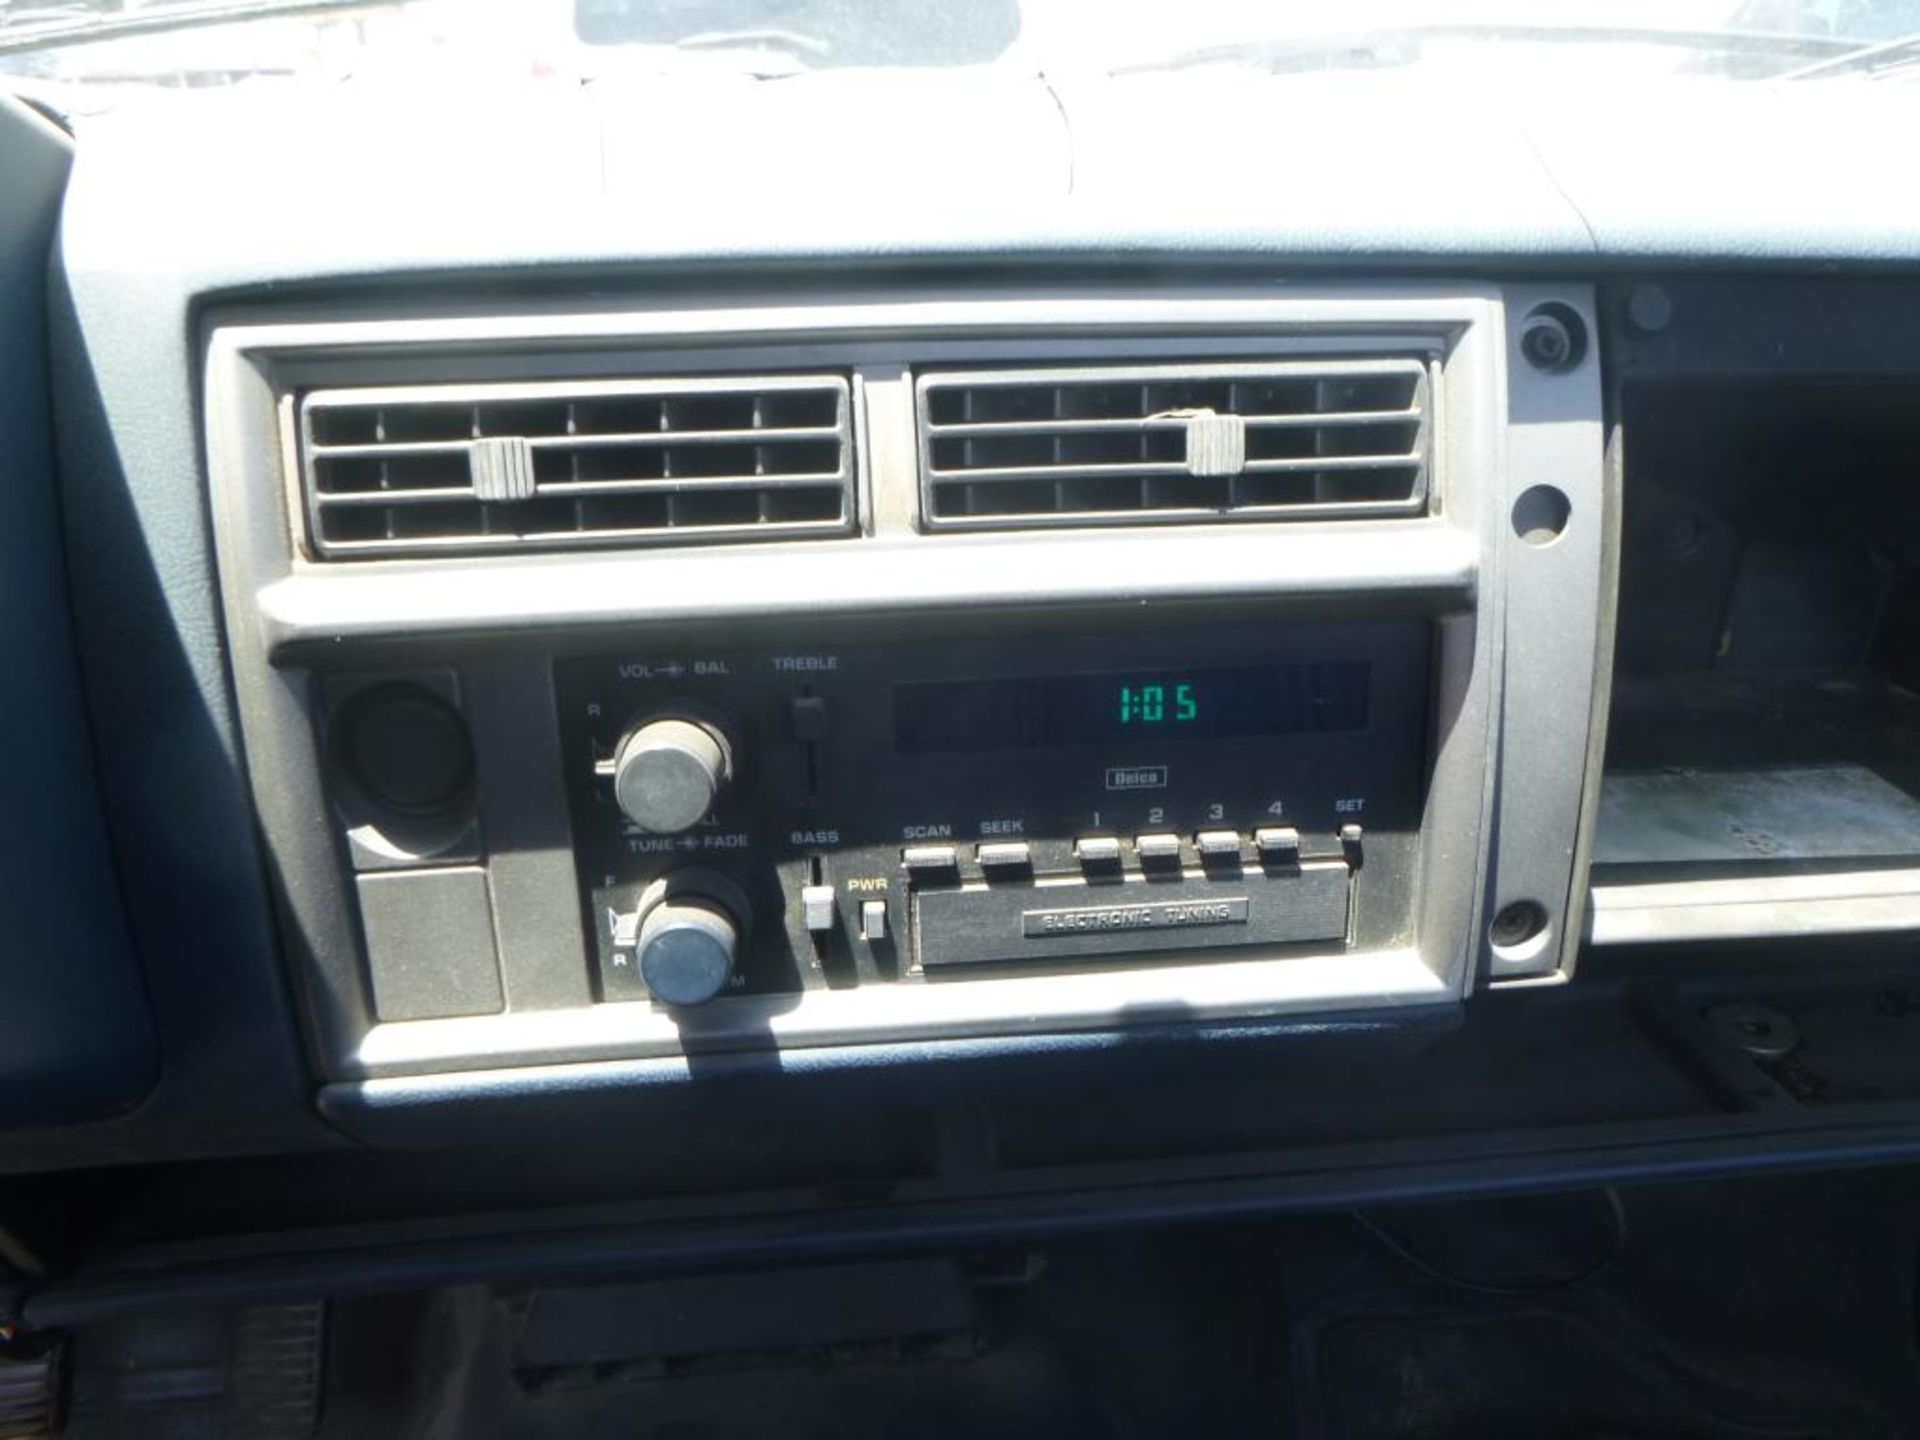 (Lot # 3437) 1989 Chevrolet S-10 - Image 11 of 11